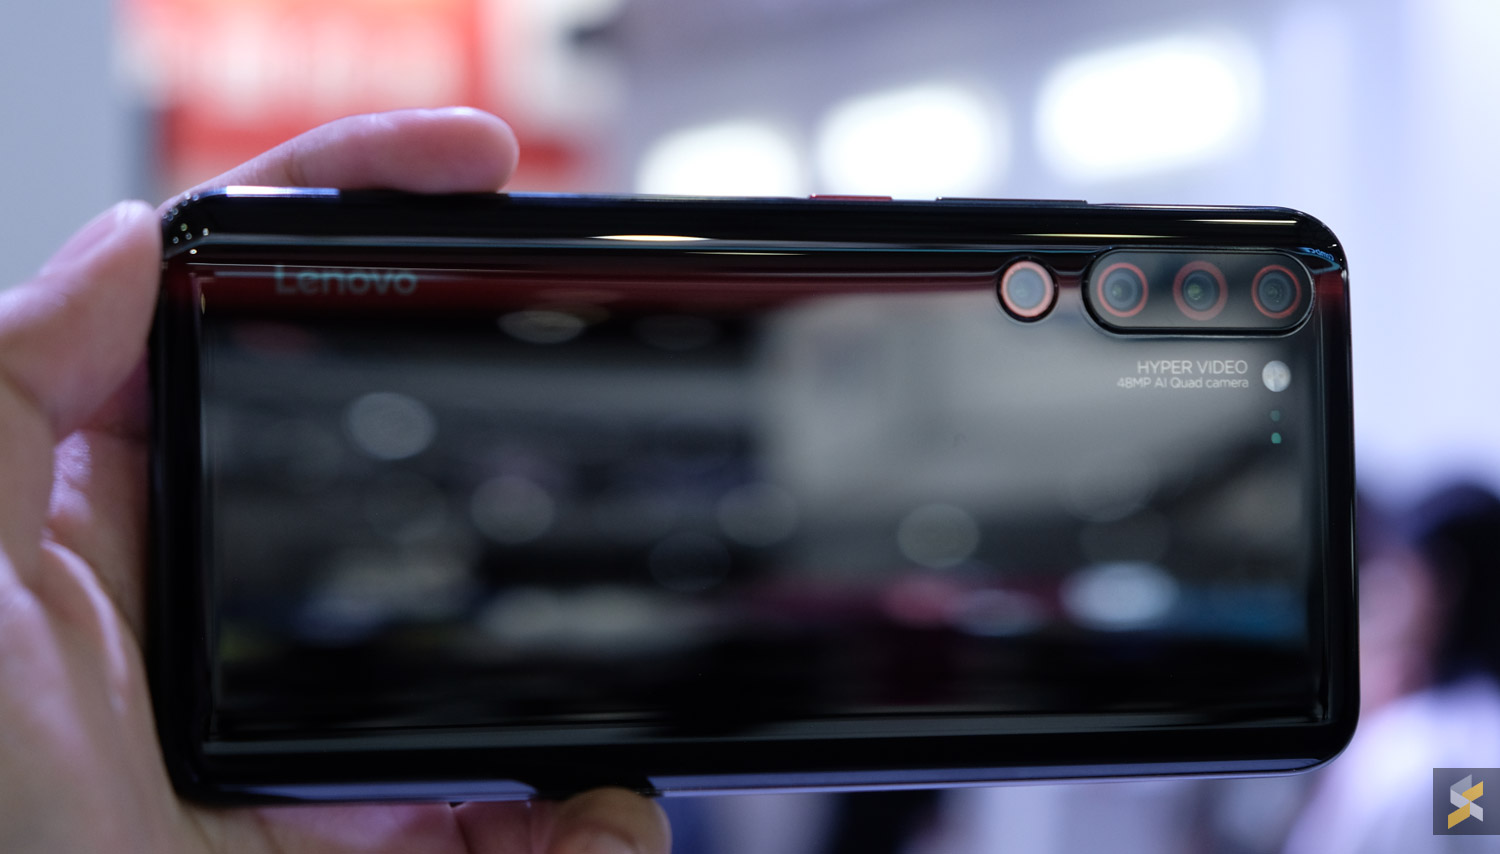 Snapdragon 855 powered Lenovo Z6 Pro with Quad-camera is now available